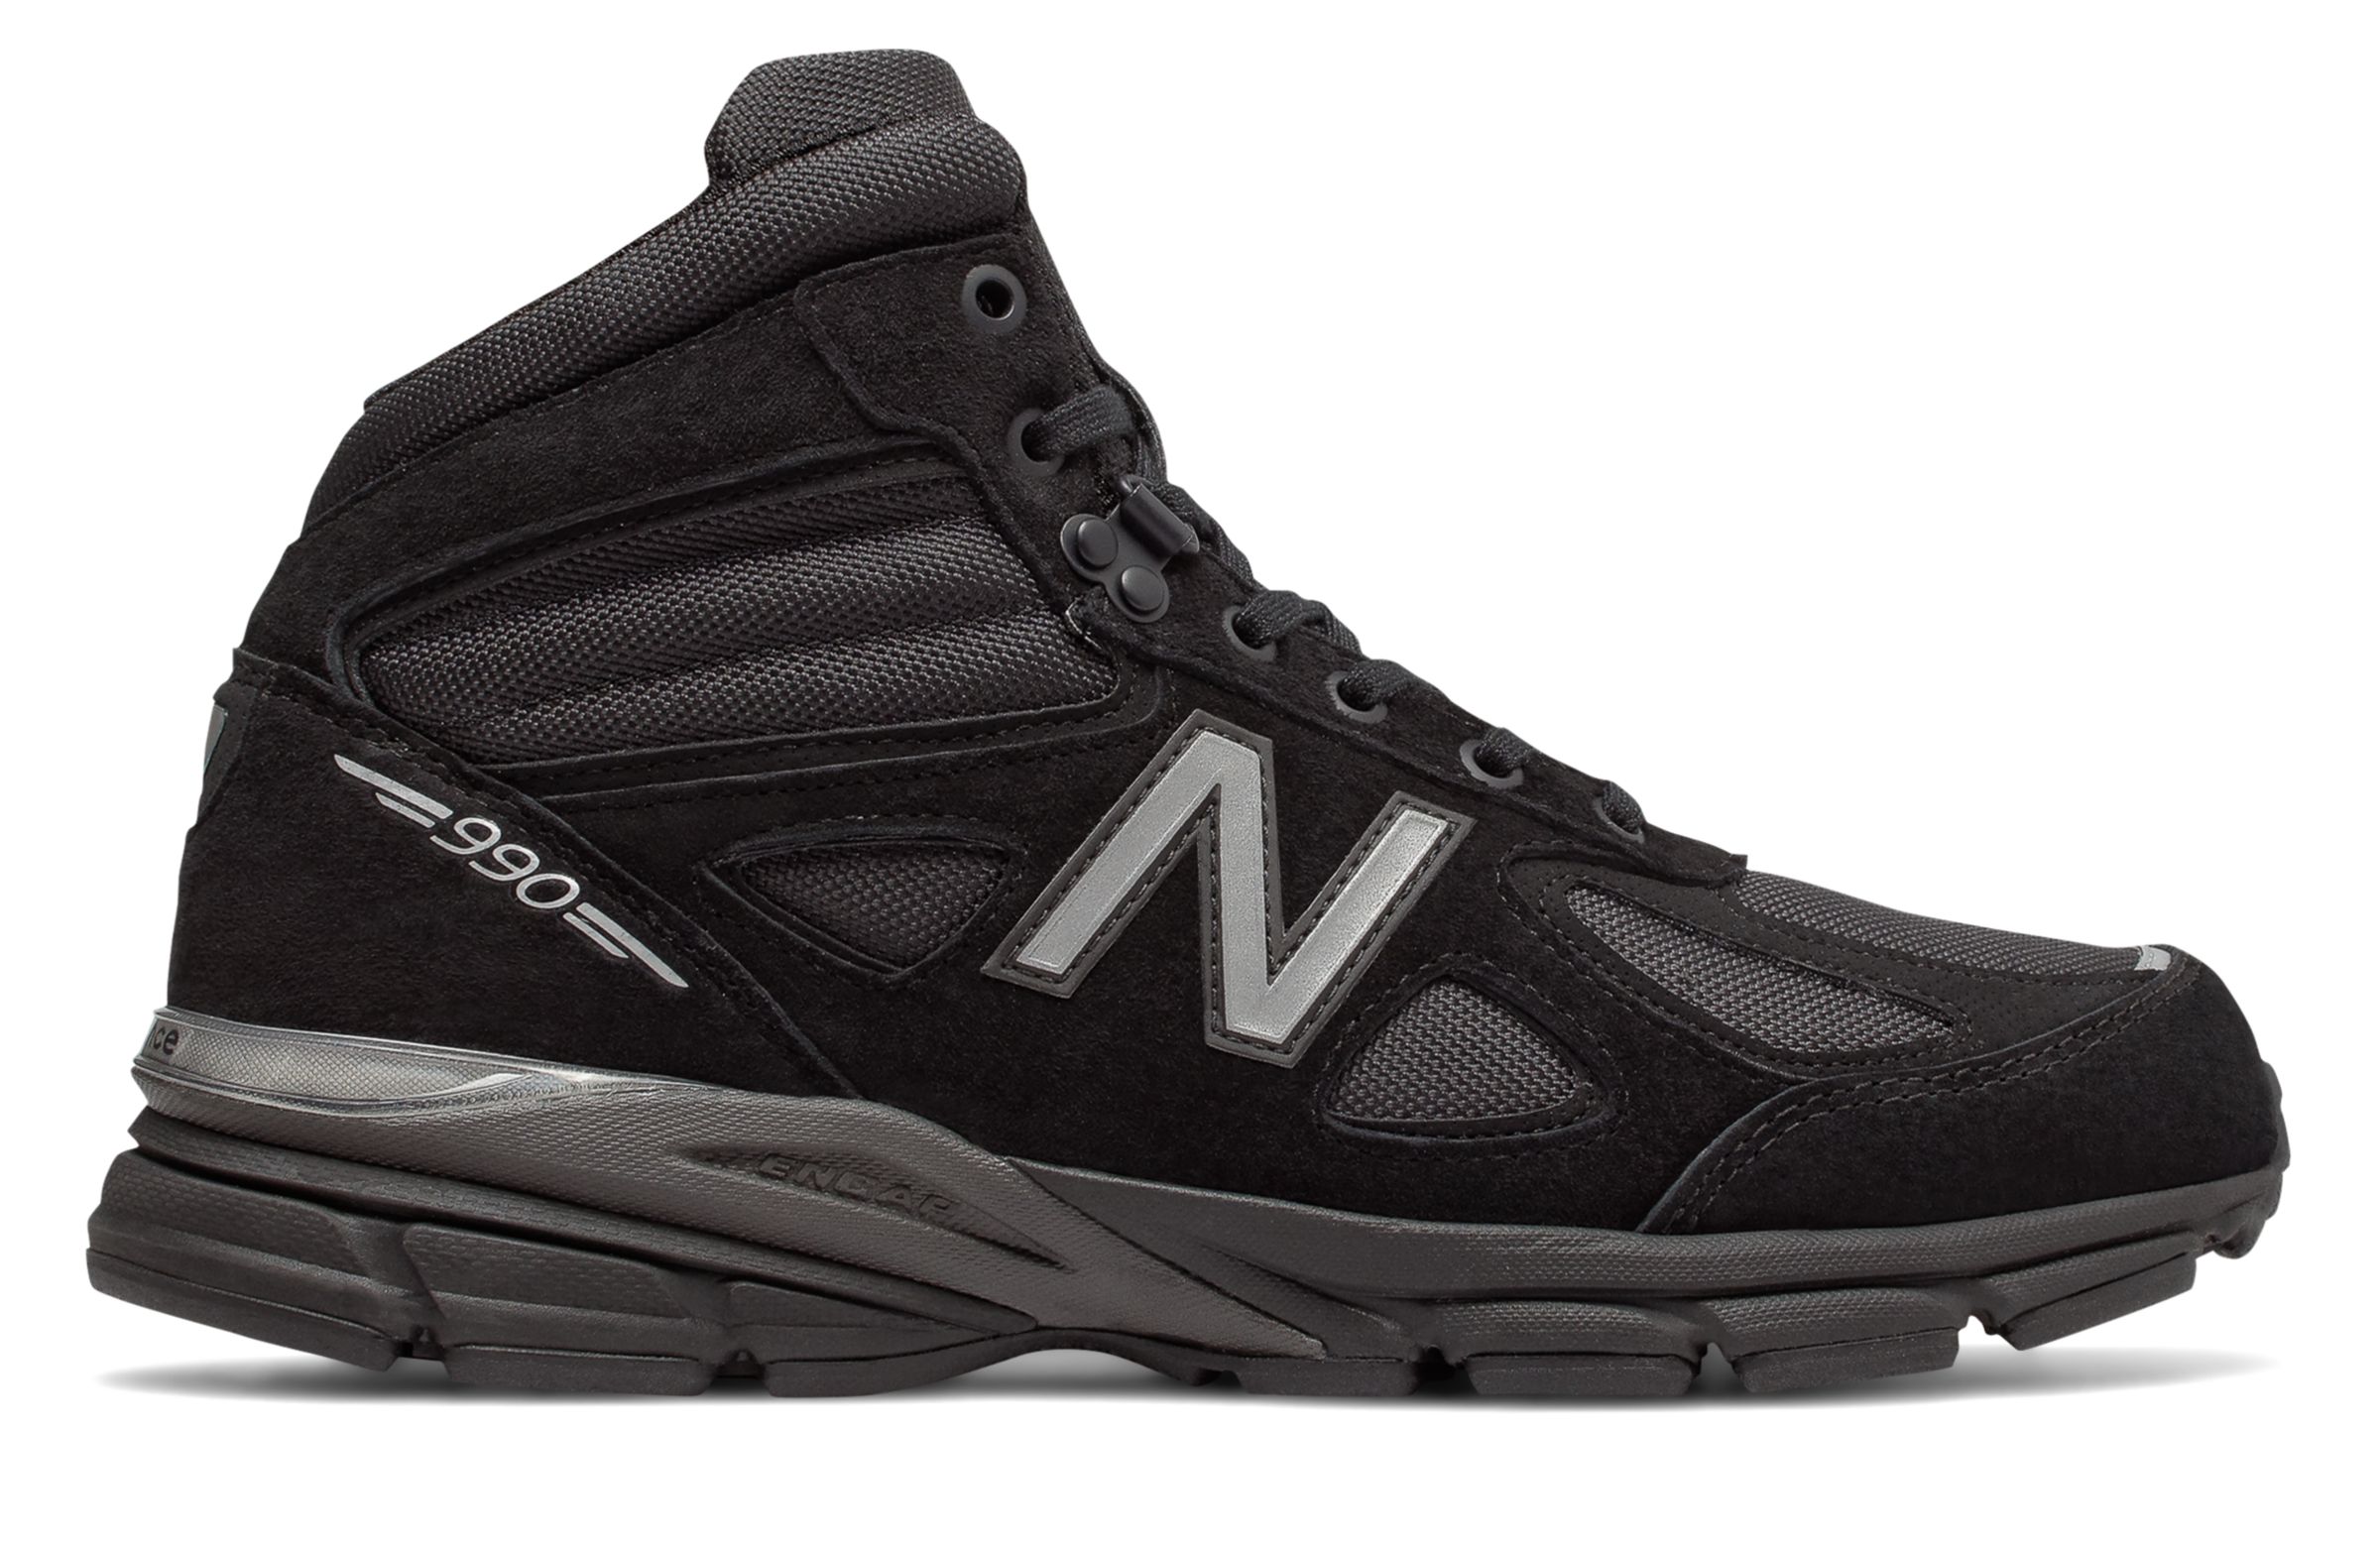 UPC 191264422254 product image for New Balance Men's 990v4 Mid Made in US Shoes Black with Grey | upcitemdb.com